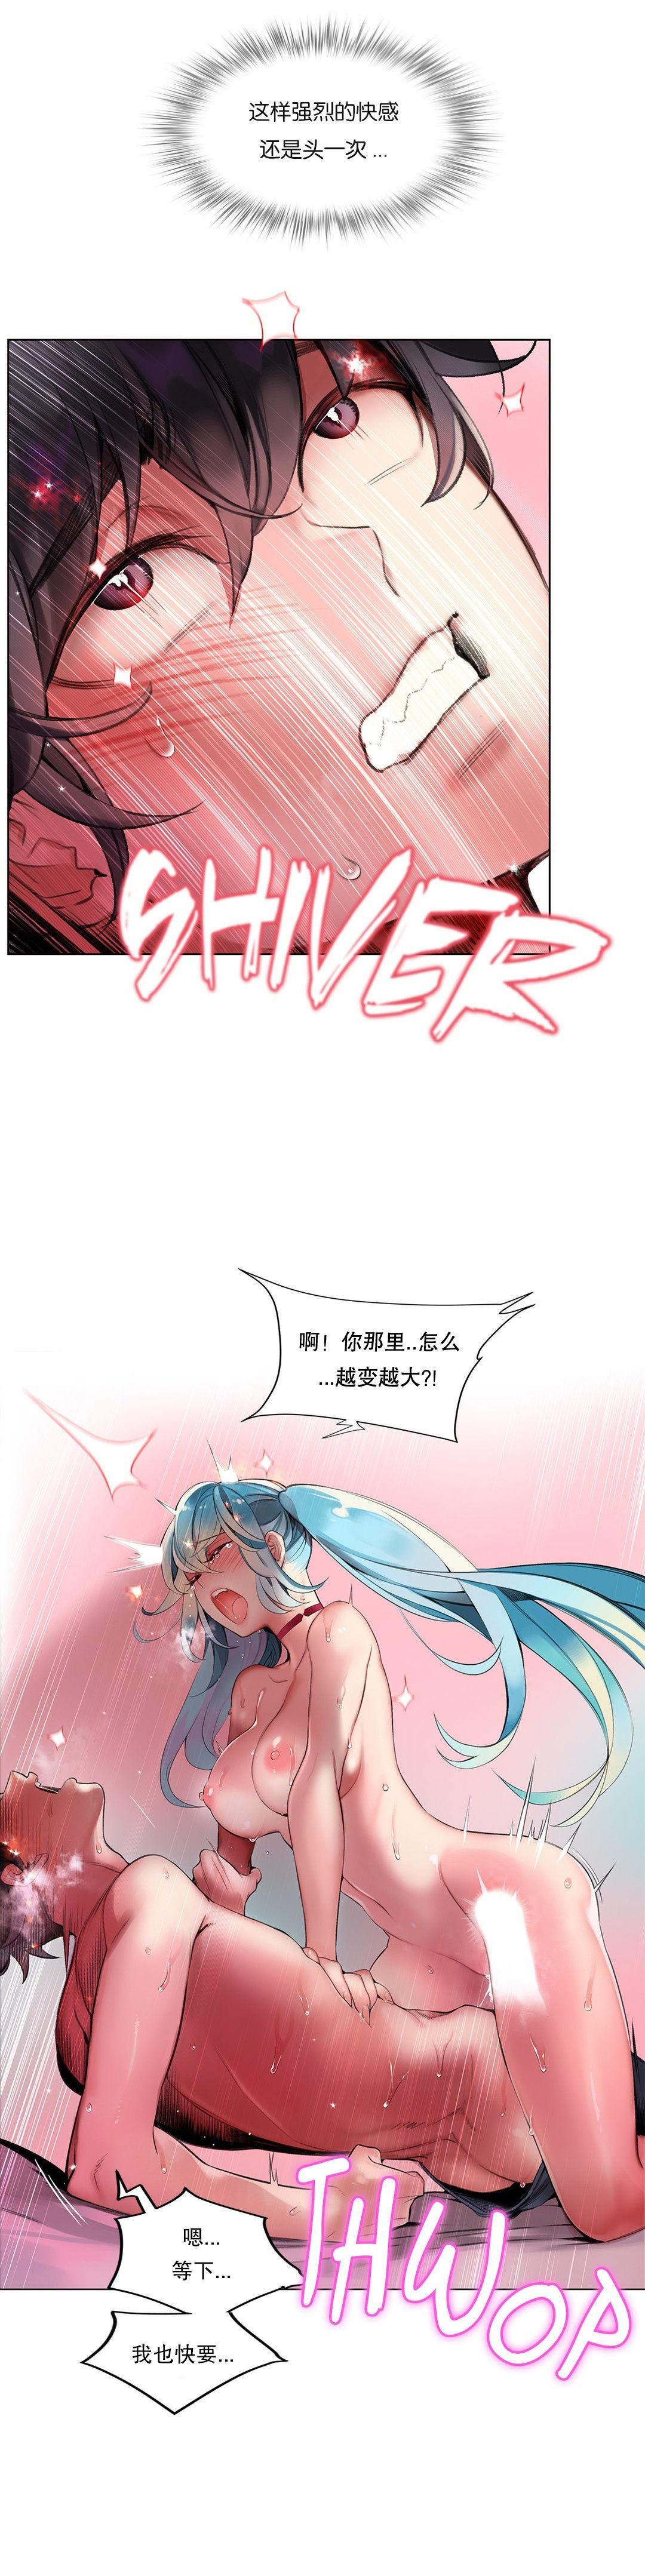 [Juder] Lilith`s Cord (第二季) Ch.61-66 [Chinese] [aaatwist个人汉化] [Ongoing] 180